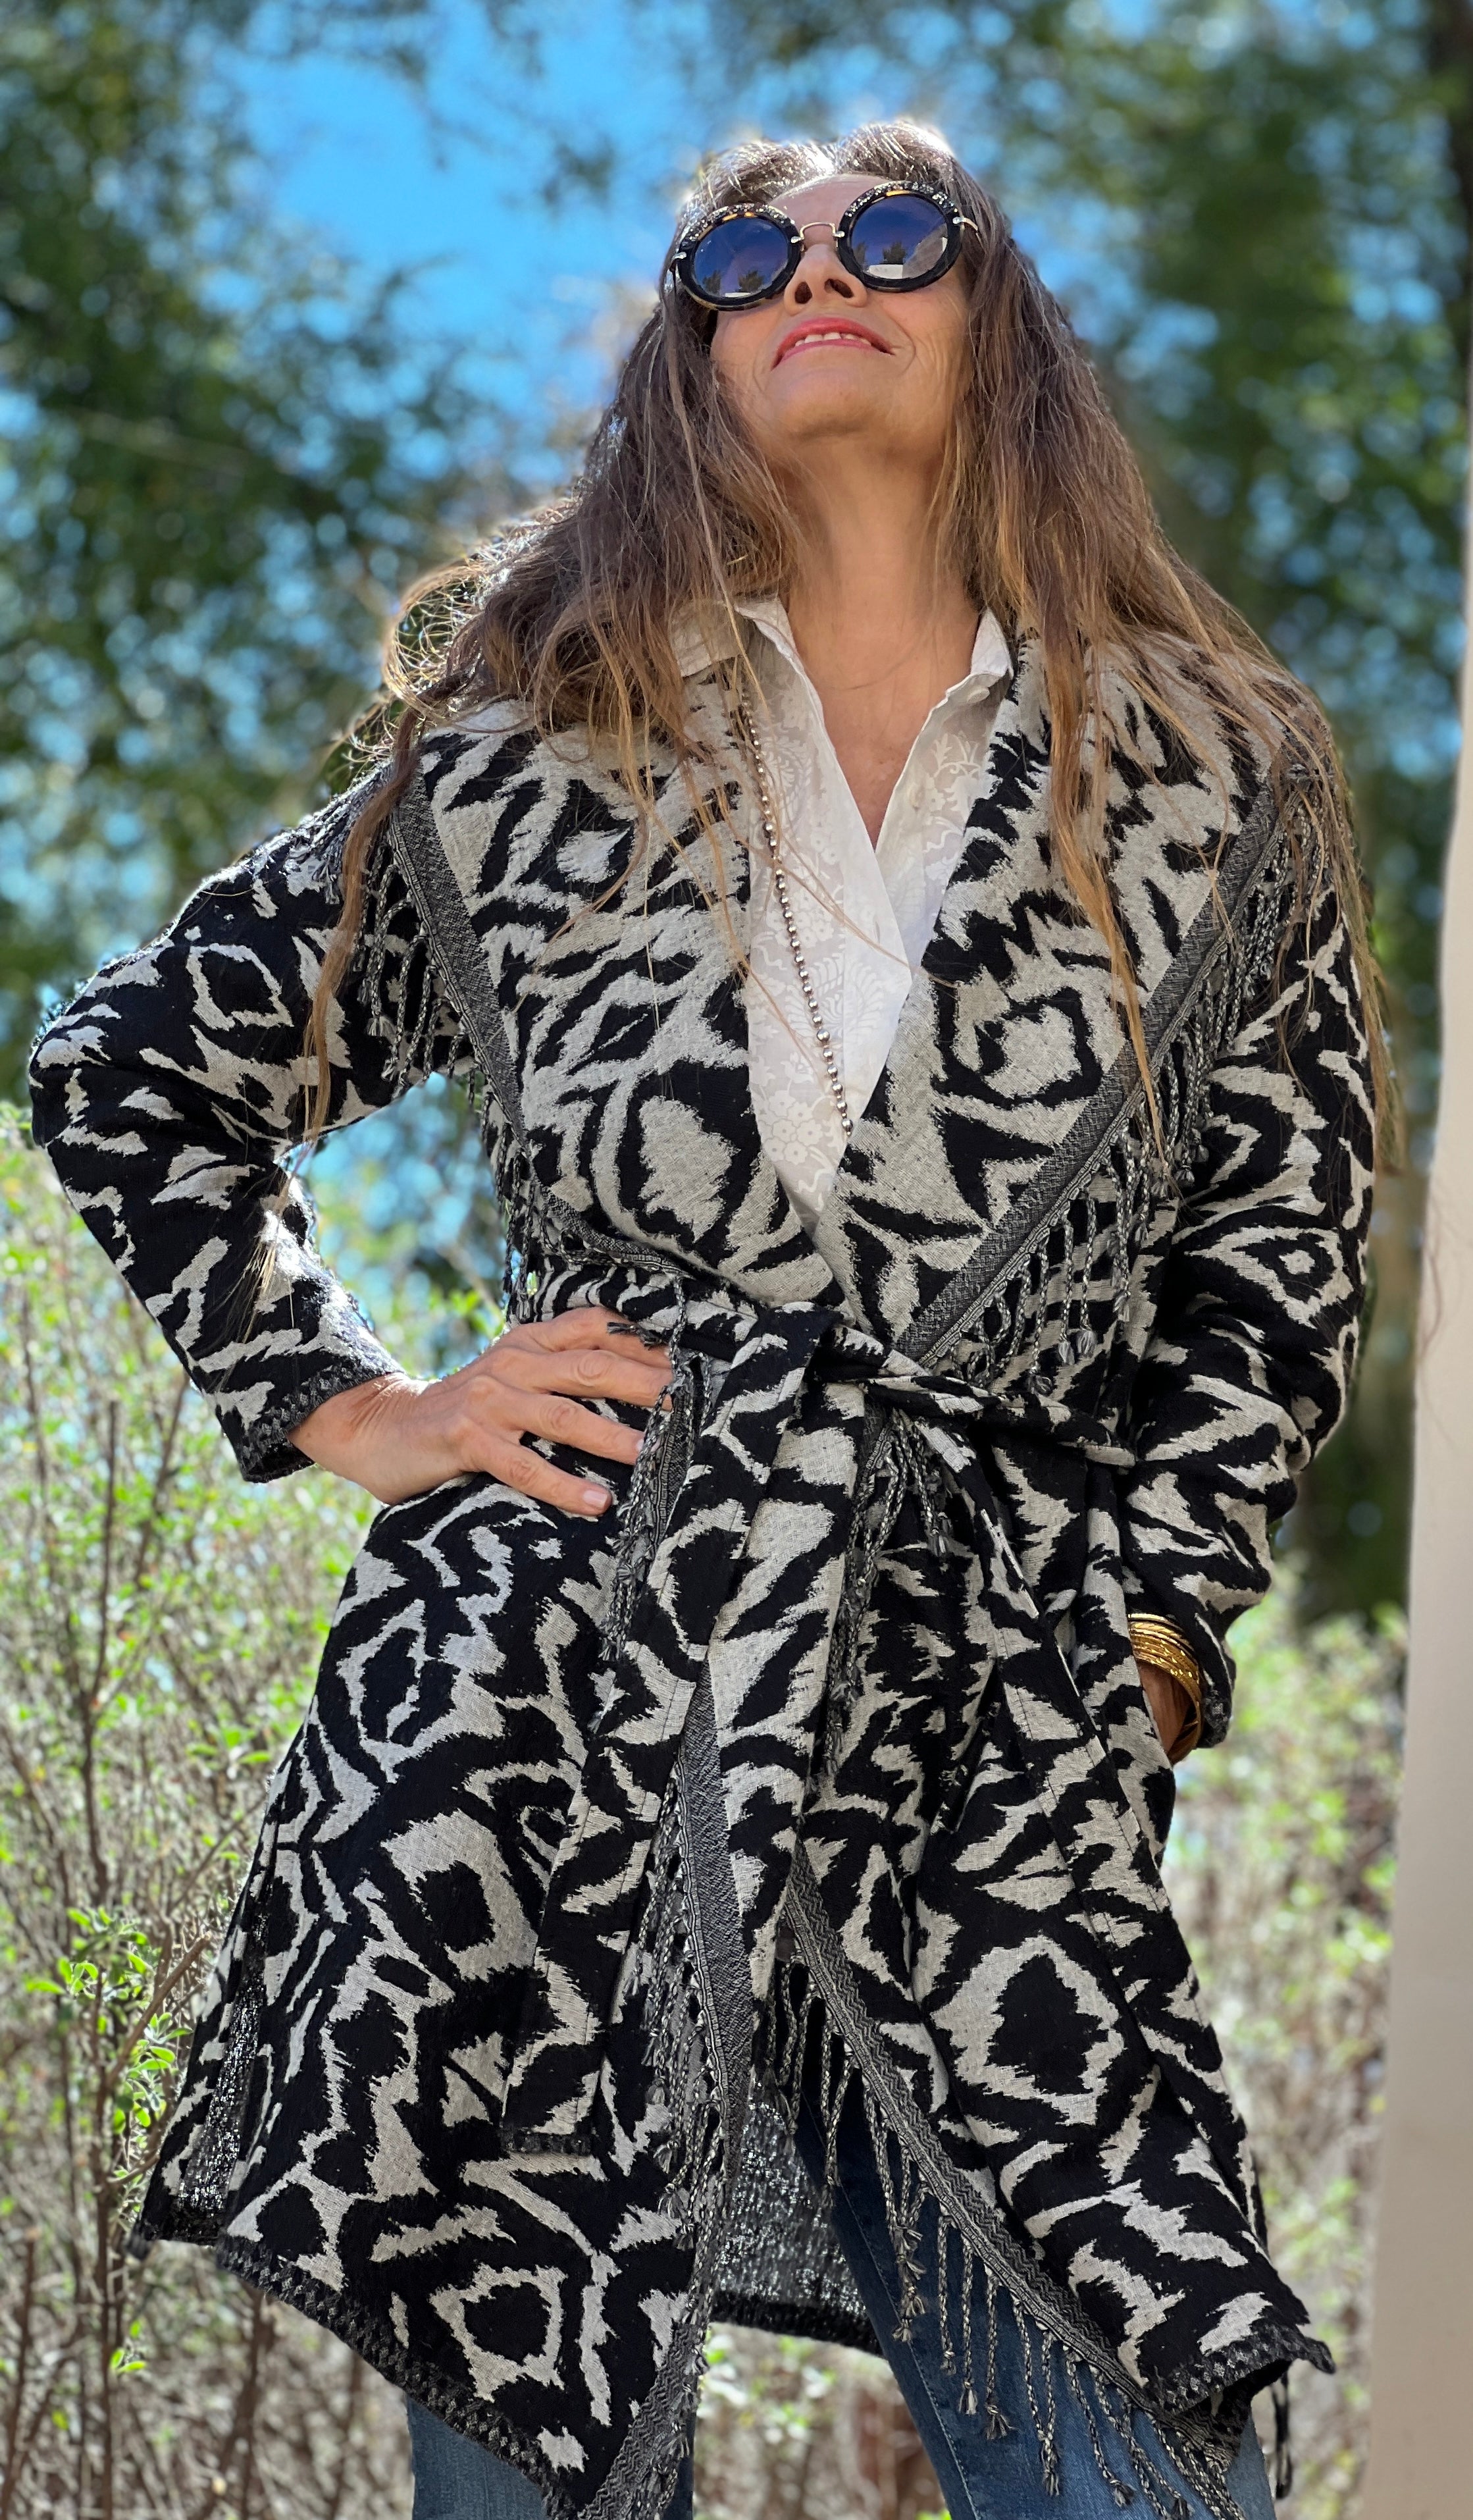 Zebra Belted Boiled Wool Coat ONLY ONE LEFT